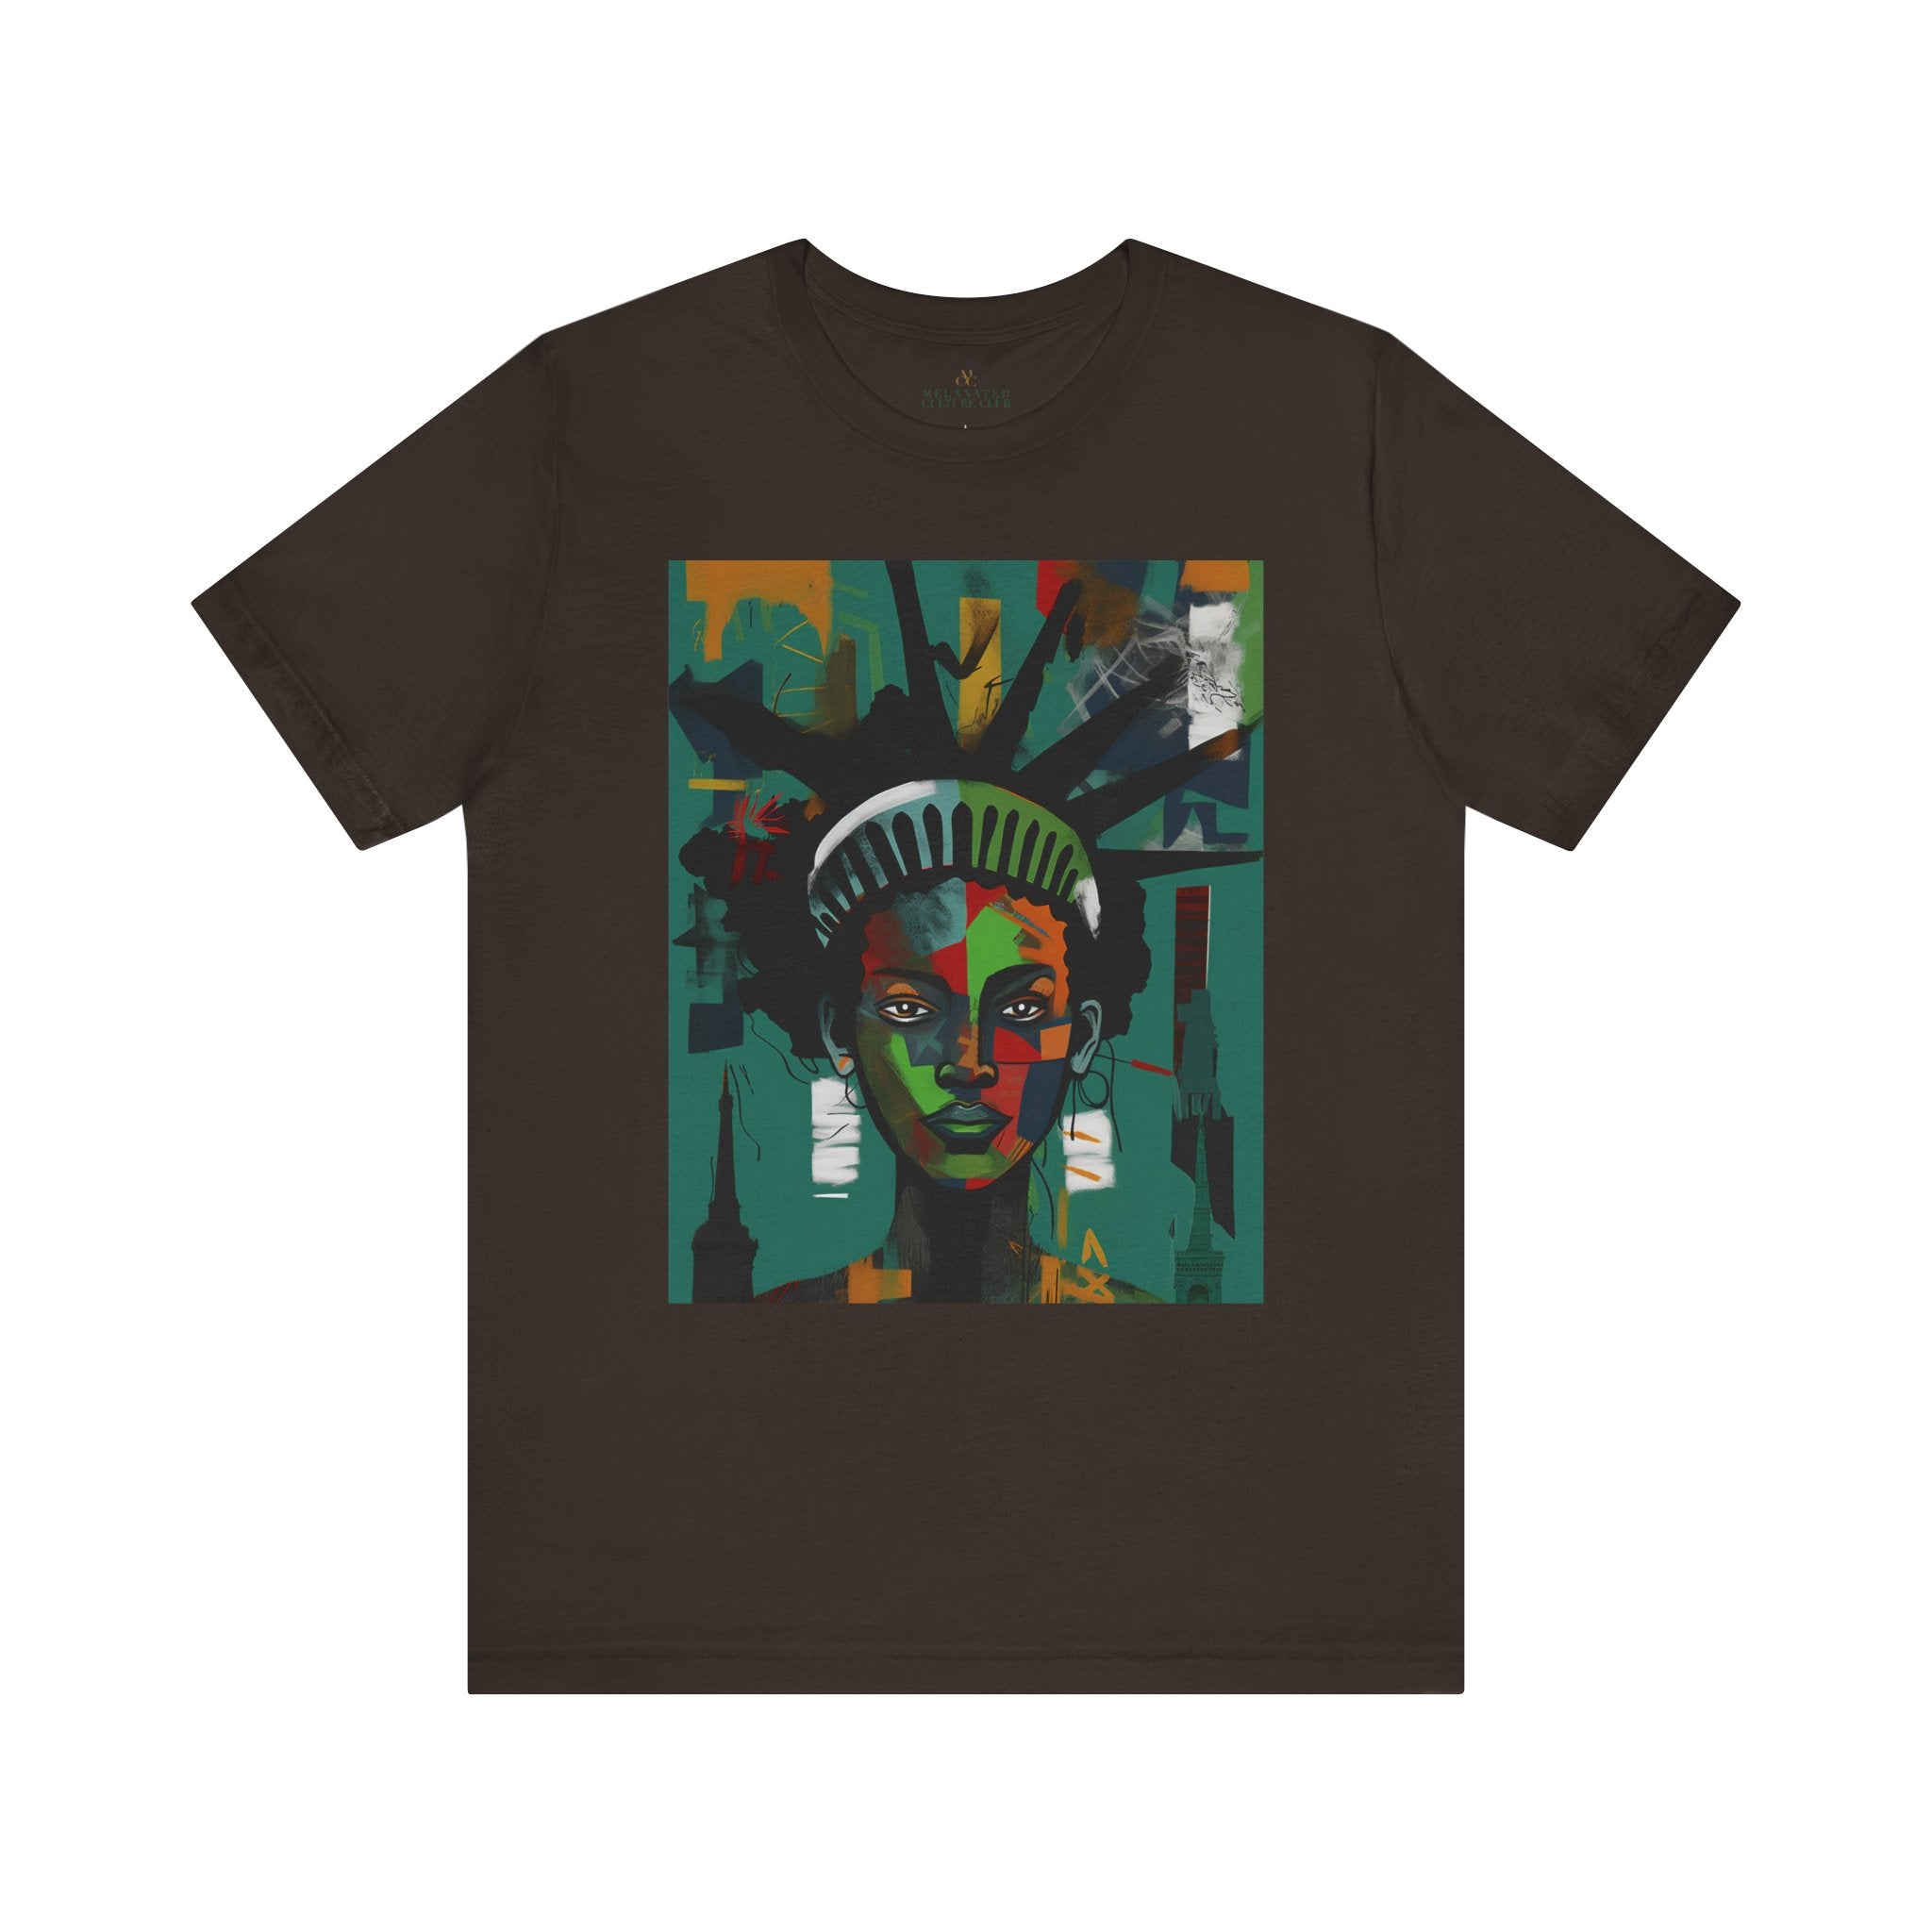 Black Woman Art Statue of Liberty Tee in brown - Style 19